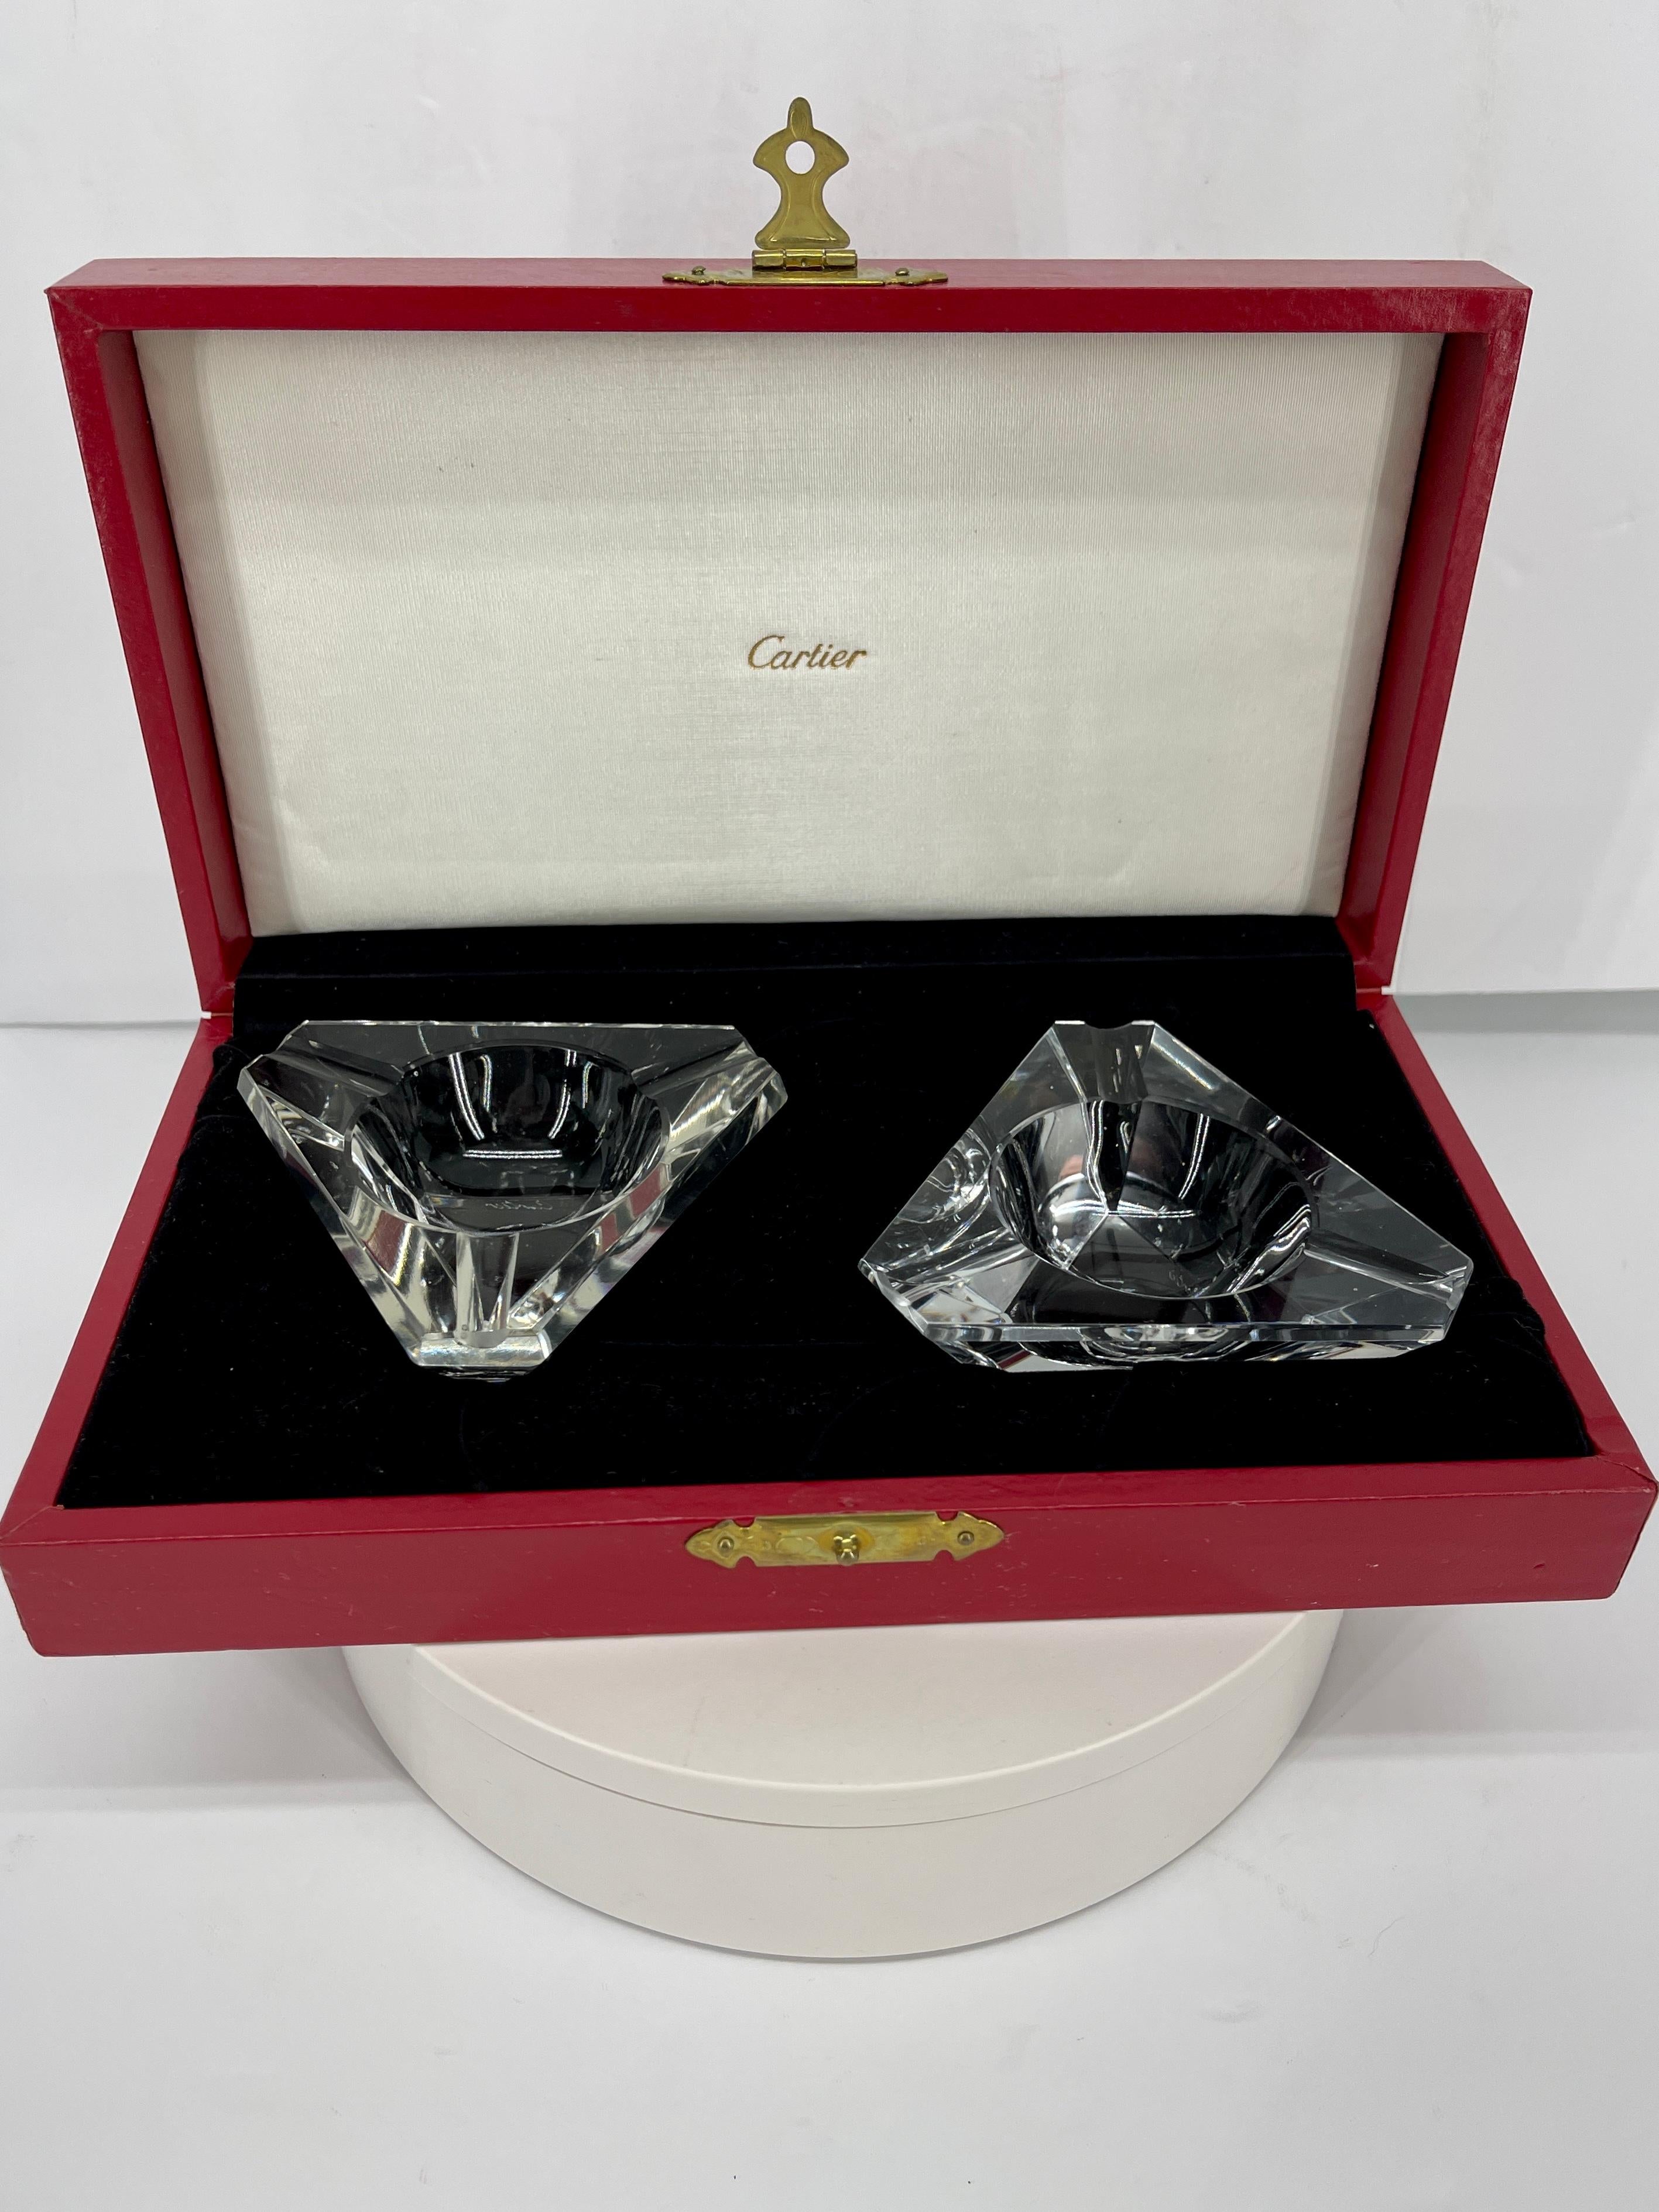 Set of Cartier faceted crystal ashtrays. This beautiful pair of ashtrays is nestled in the original red leather Cartier box with brass accented handle. Each ashtray is signed Cartier on the bottom. The timeless set of personal ashtrays is an elegant